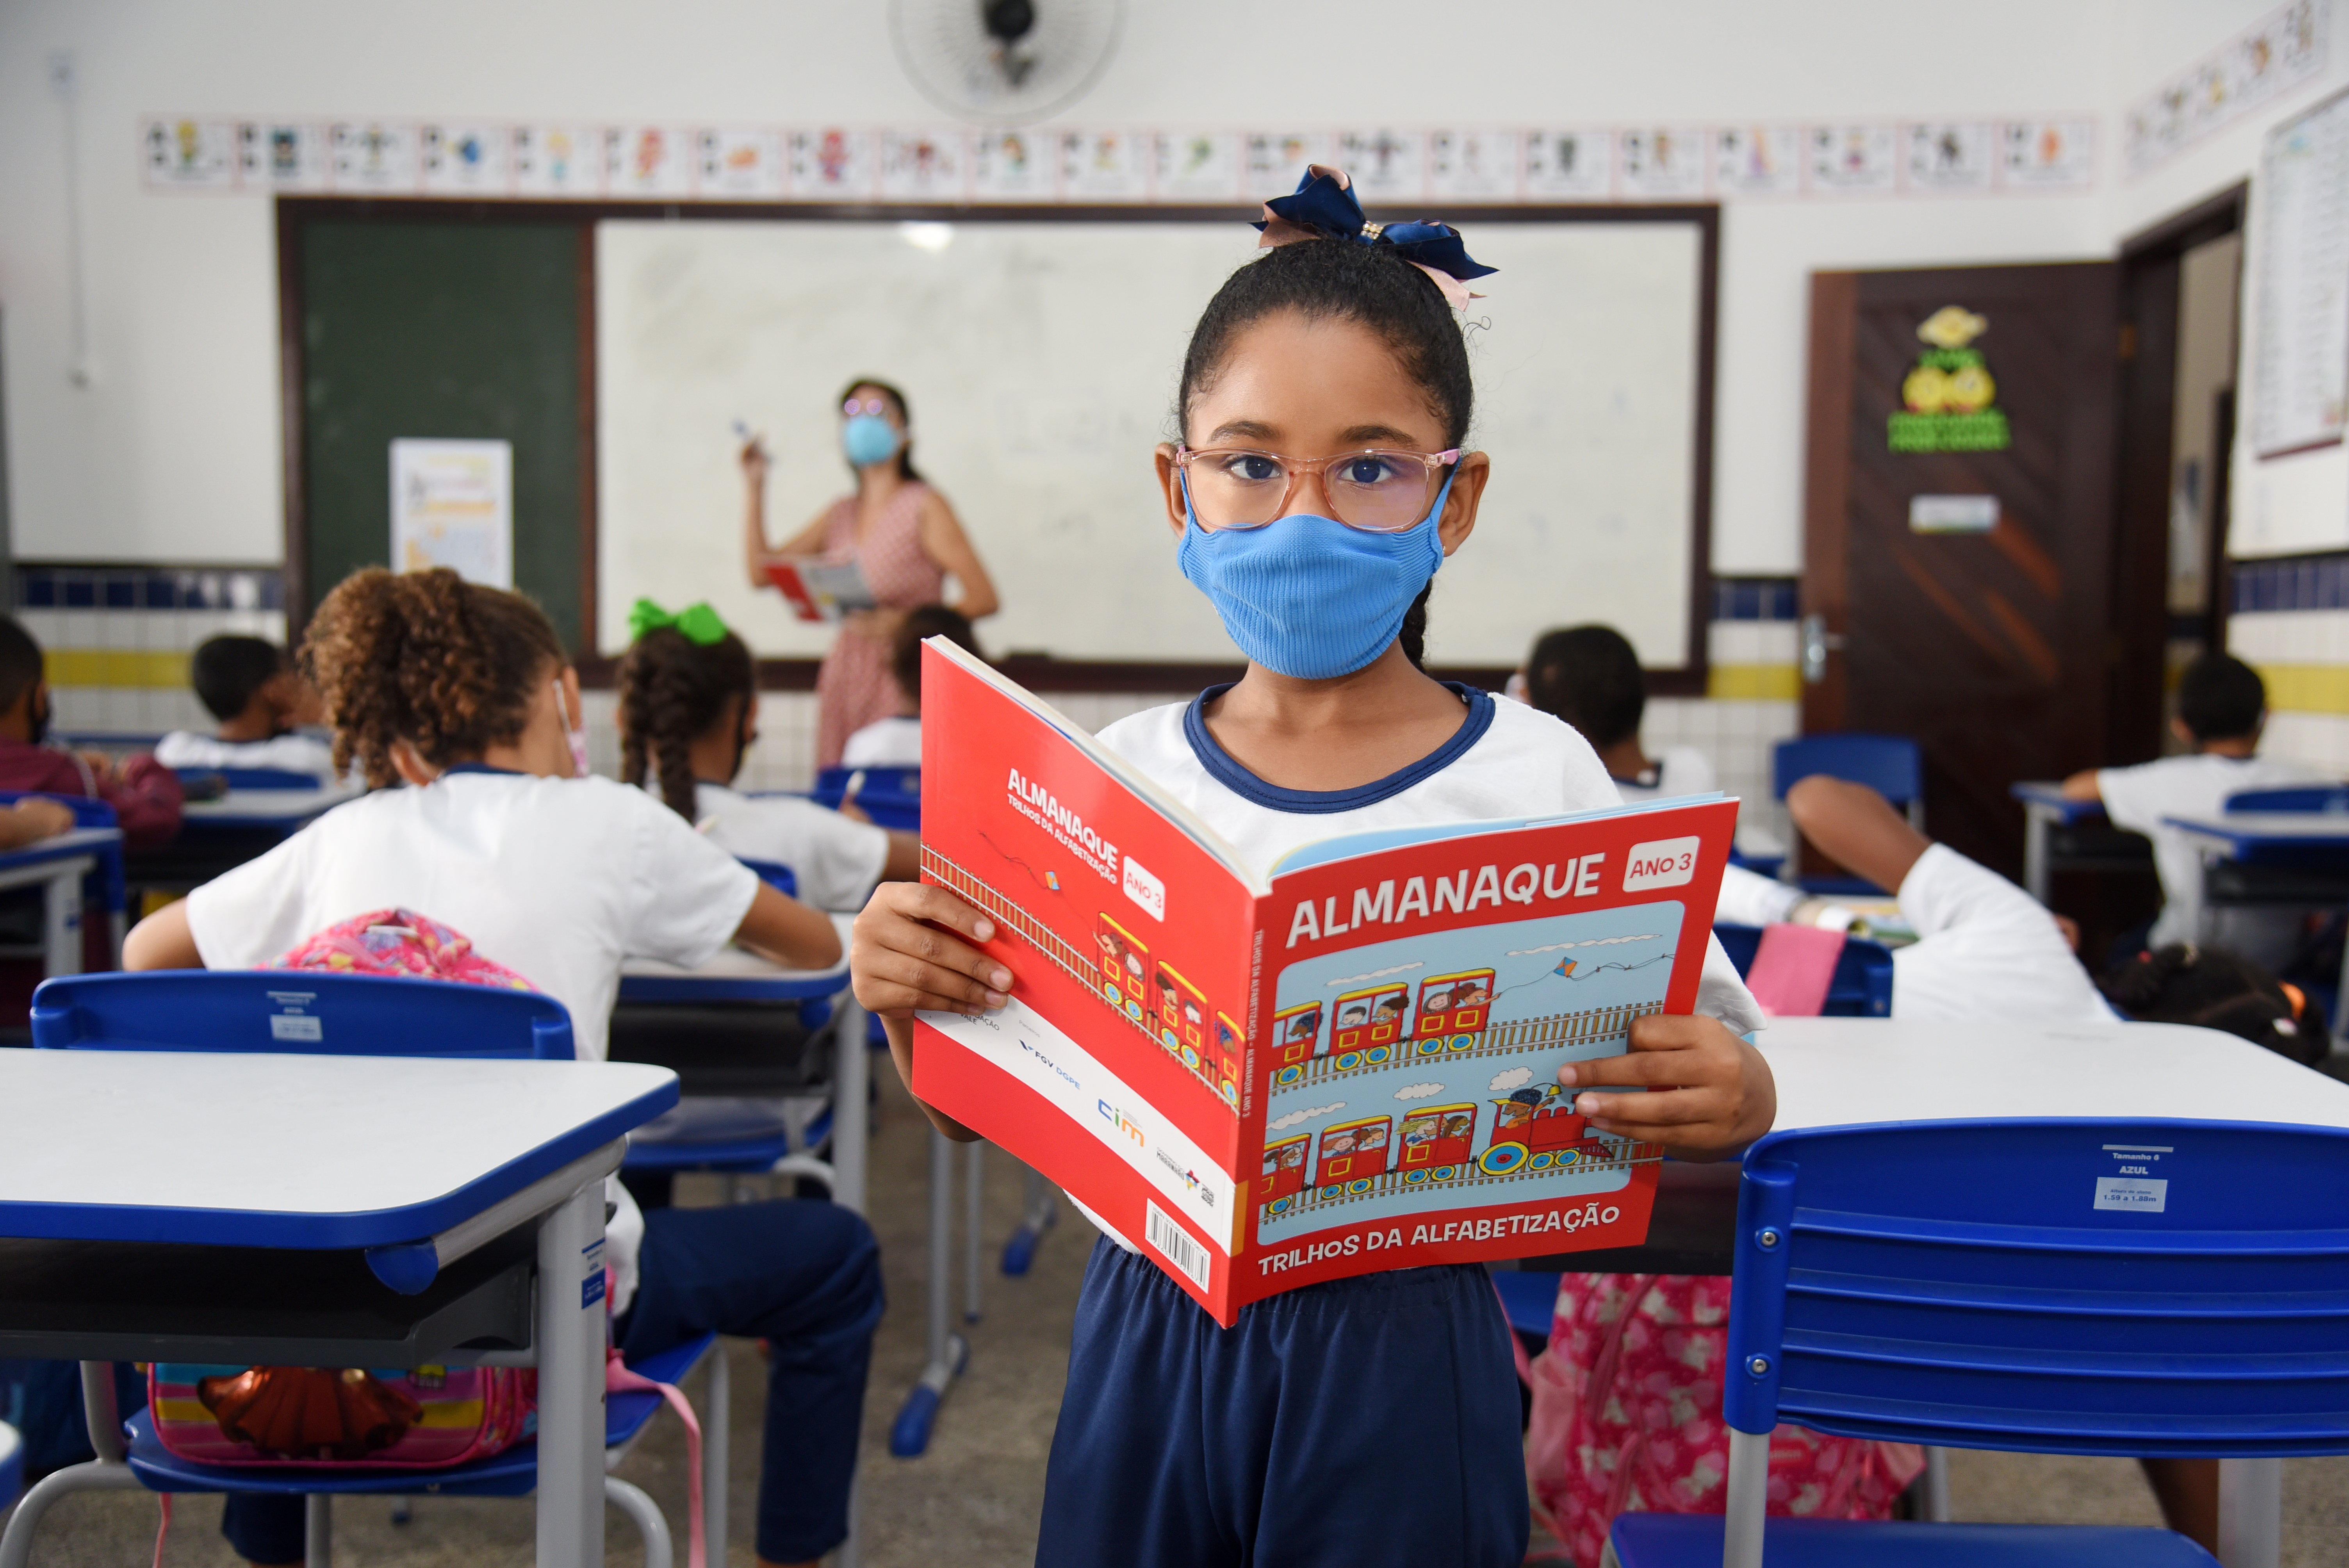 Image of a student who is part of the Vale Foundation's social initiatives. She is standing, wearing glasses and a mask, and holding a book. Behind her you can see the class with their attention focused on the teacher who is standing in front of the blackboard.